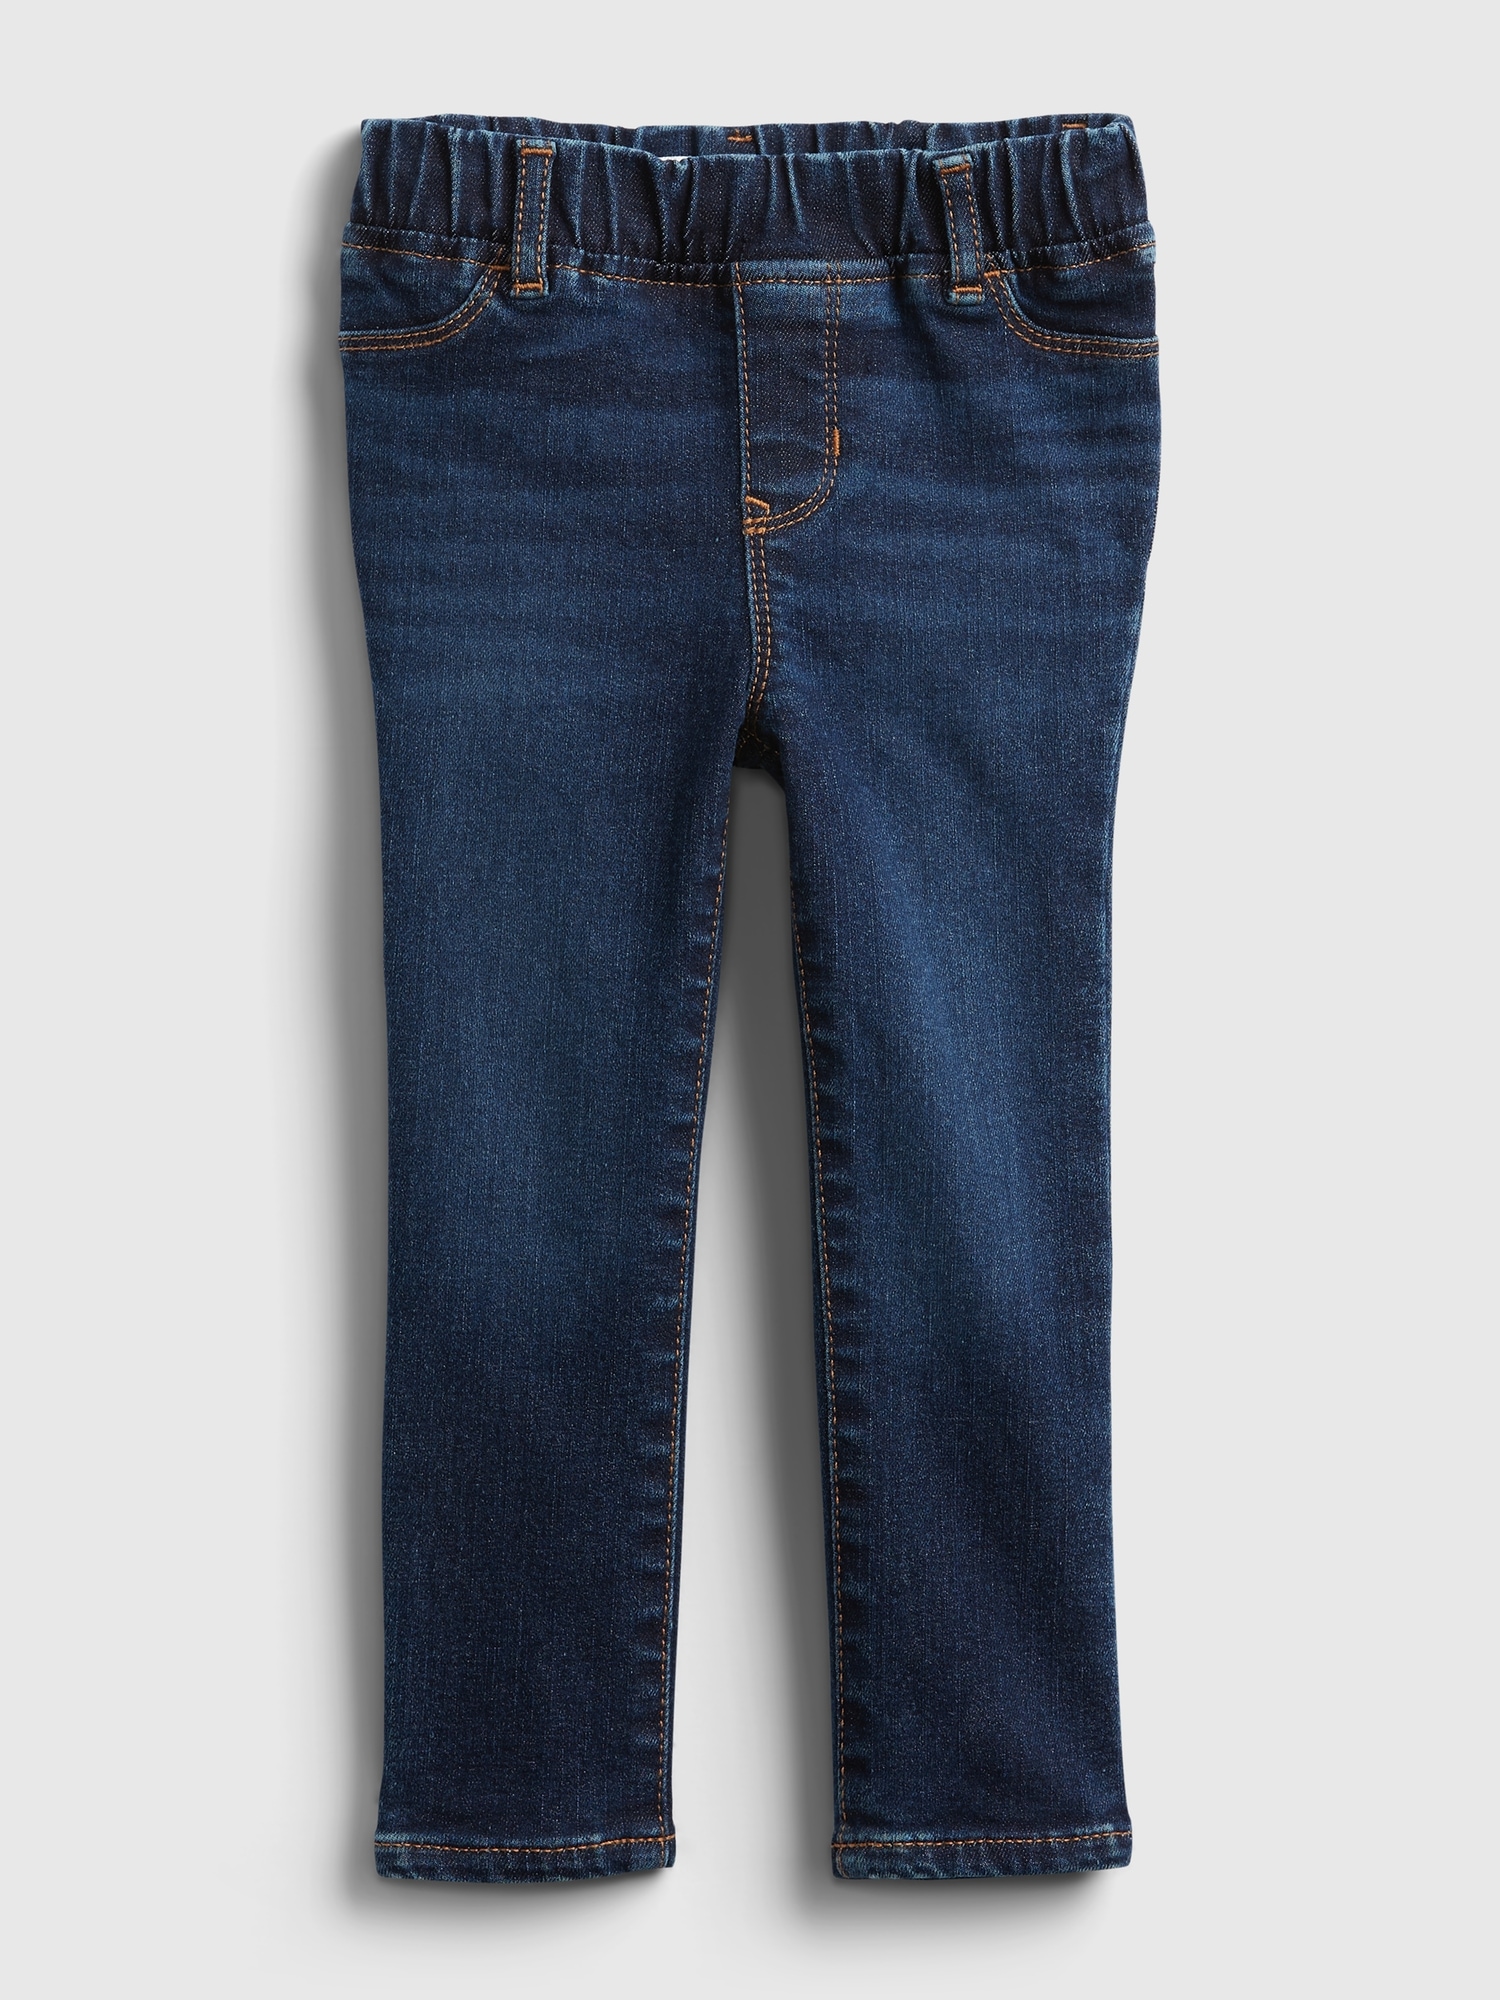 Girl's Pep & Co Pull On Jeggings- Size 5/6 Years – Refa's Thrift Closet